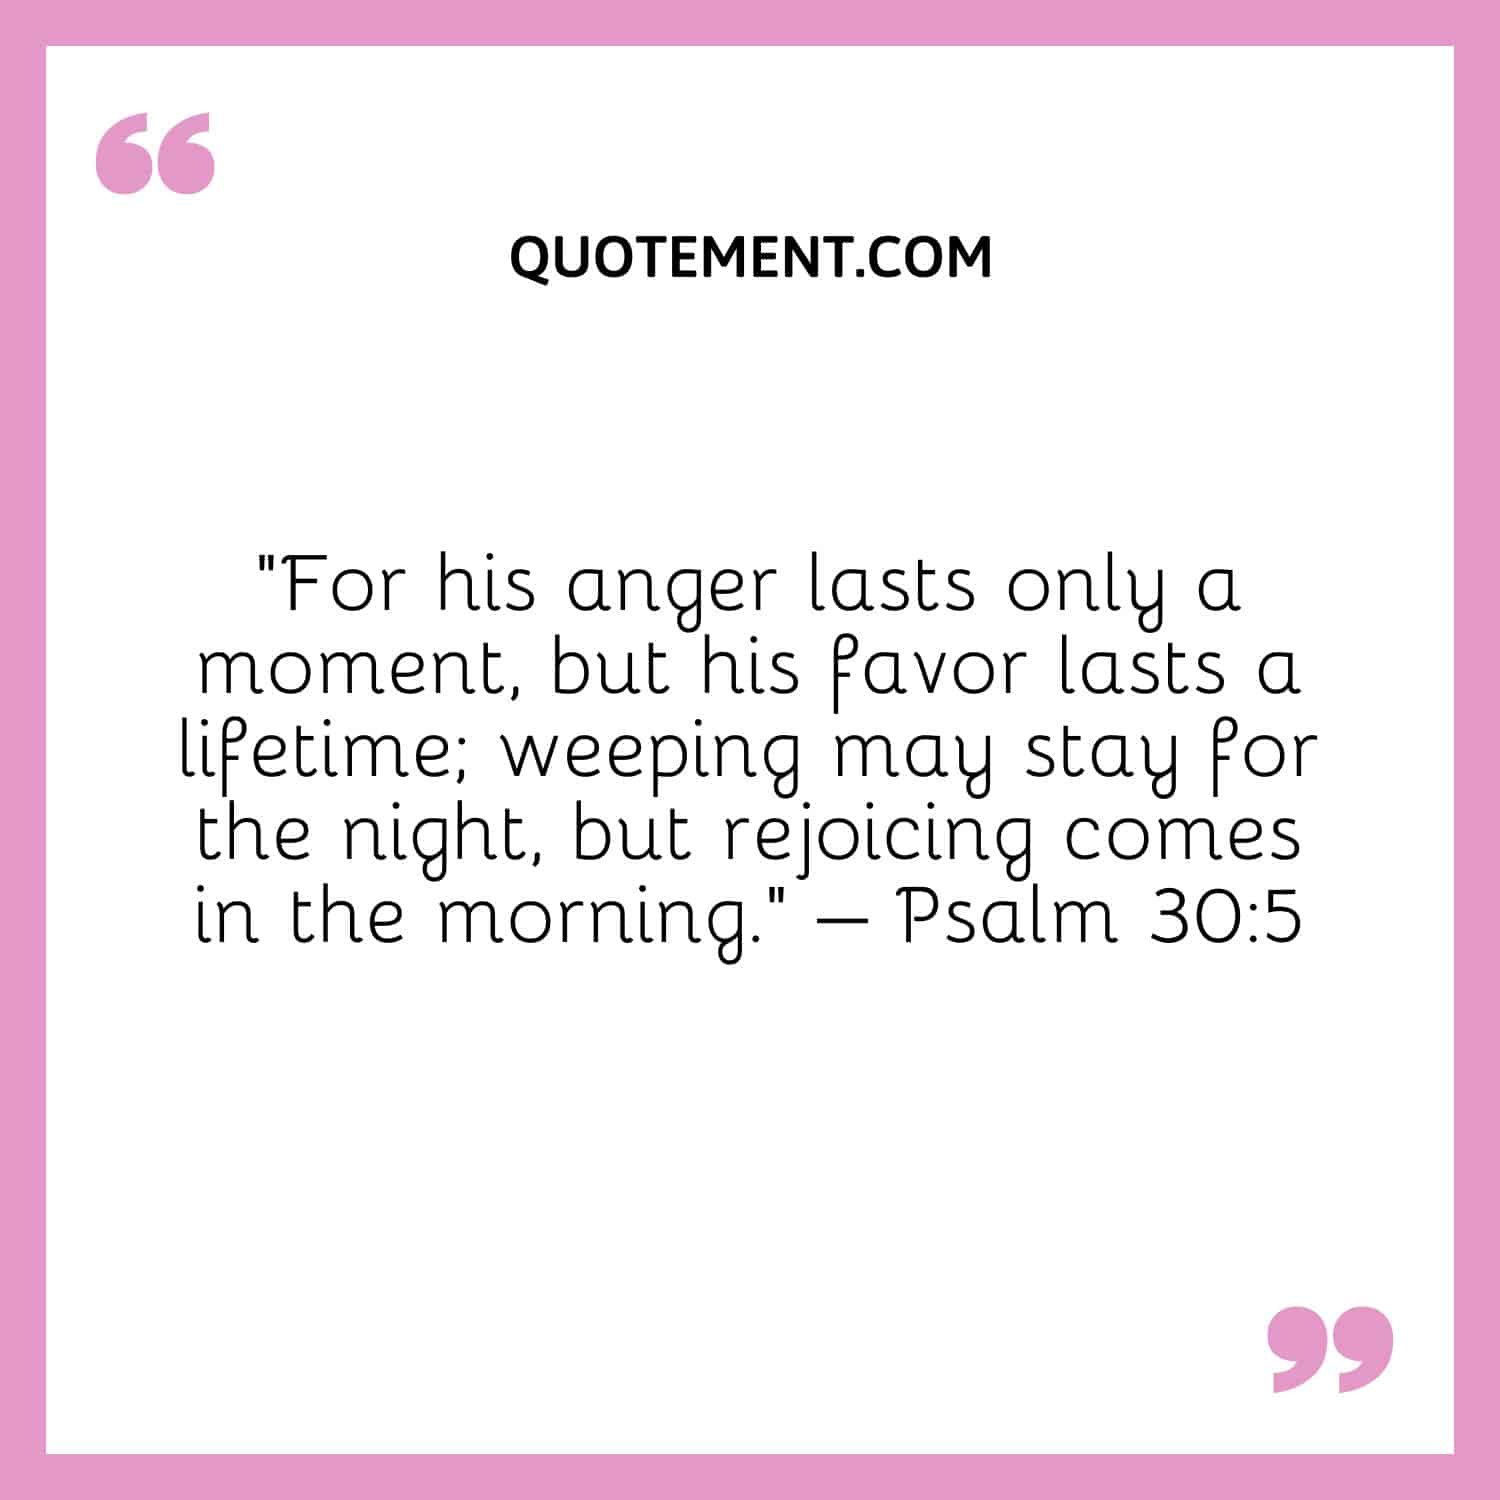 “For his anger lasts only a moment, but his favor lasts a lifetime; weeping may stay for the night, but rejoicing comes in the morning.” – Psalm 305